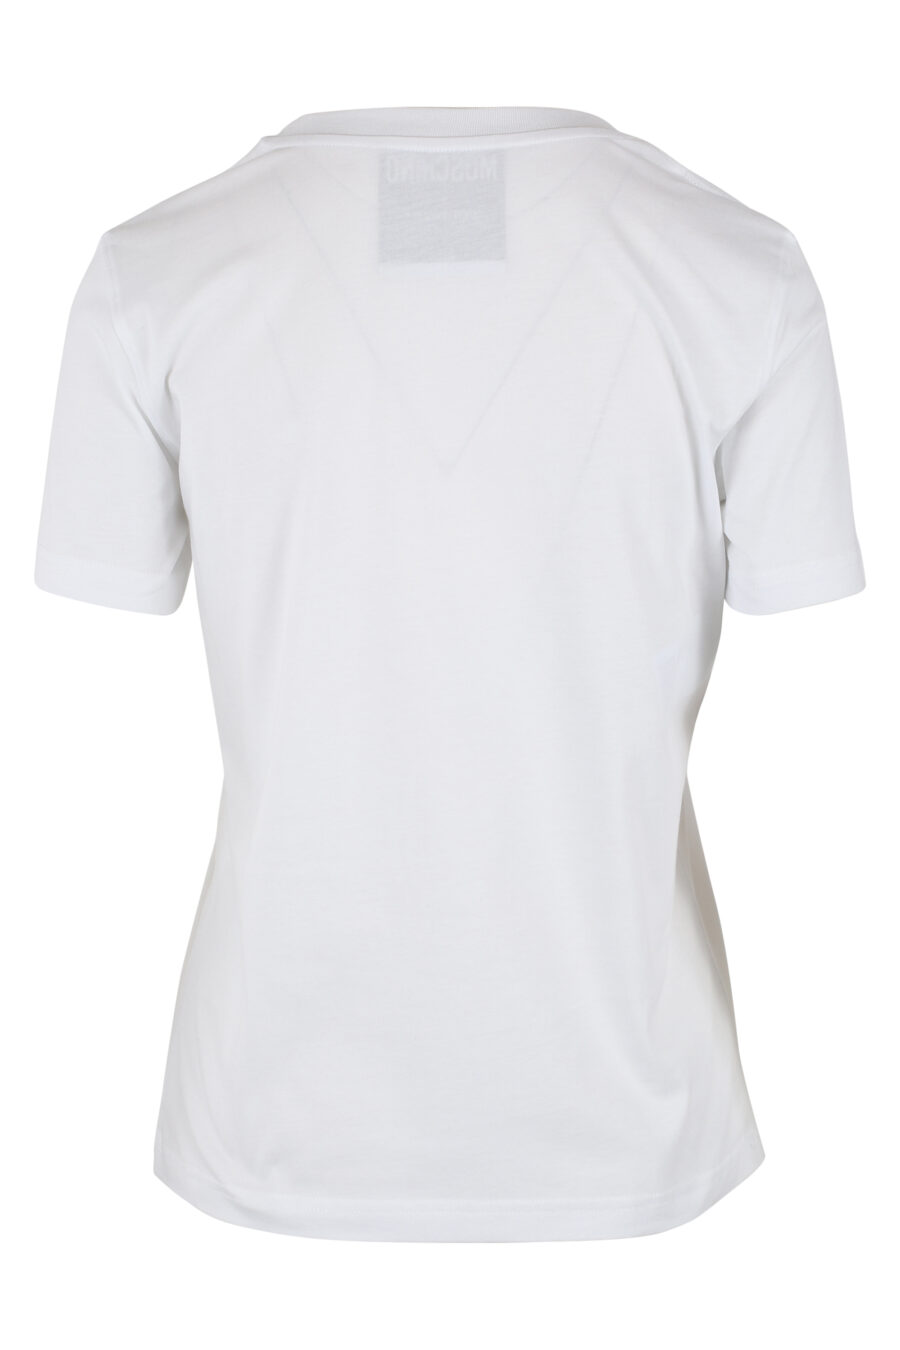 White T-shirt with "smiley" logo - IMG 5046 2